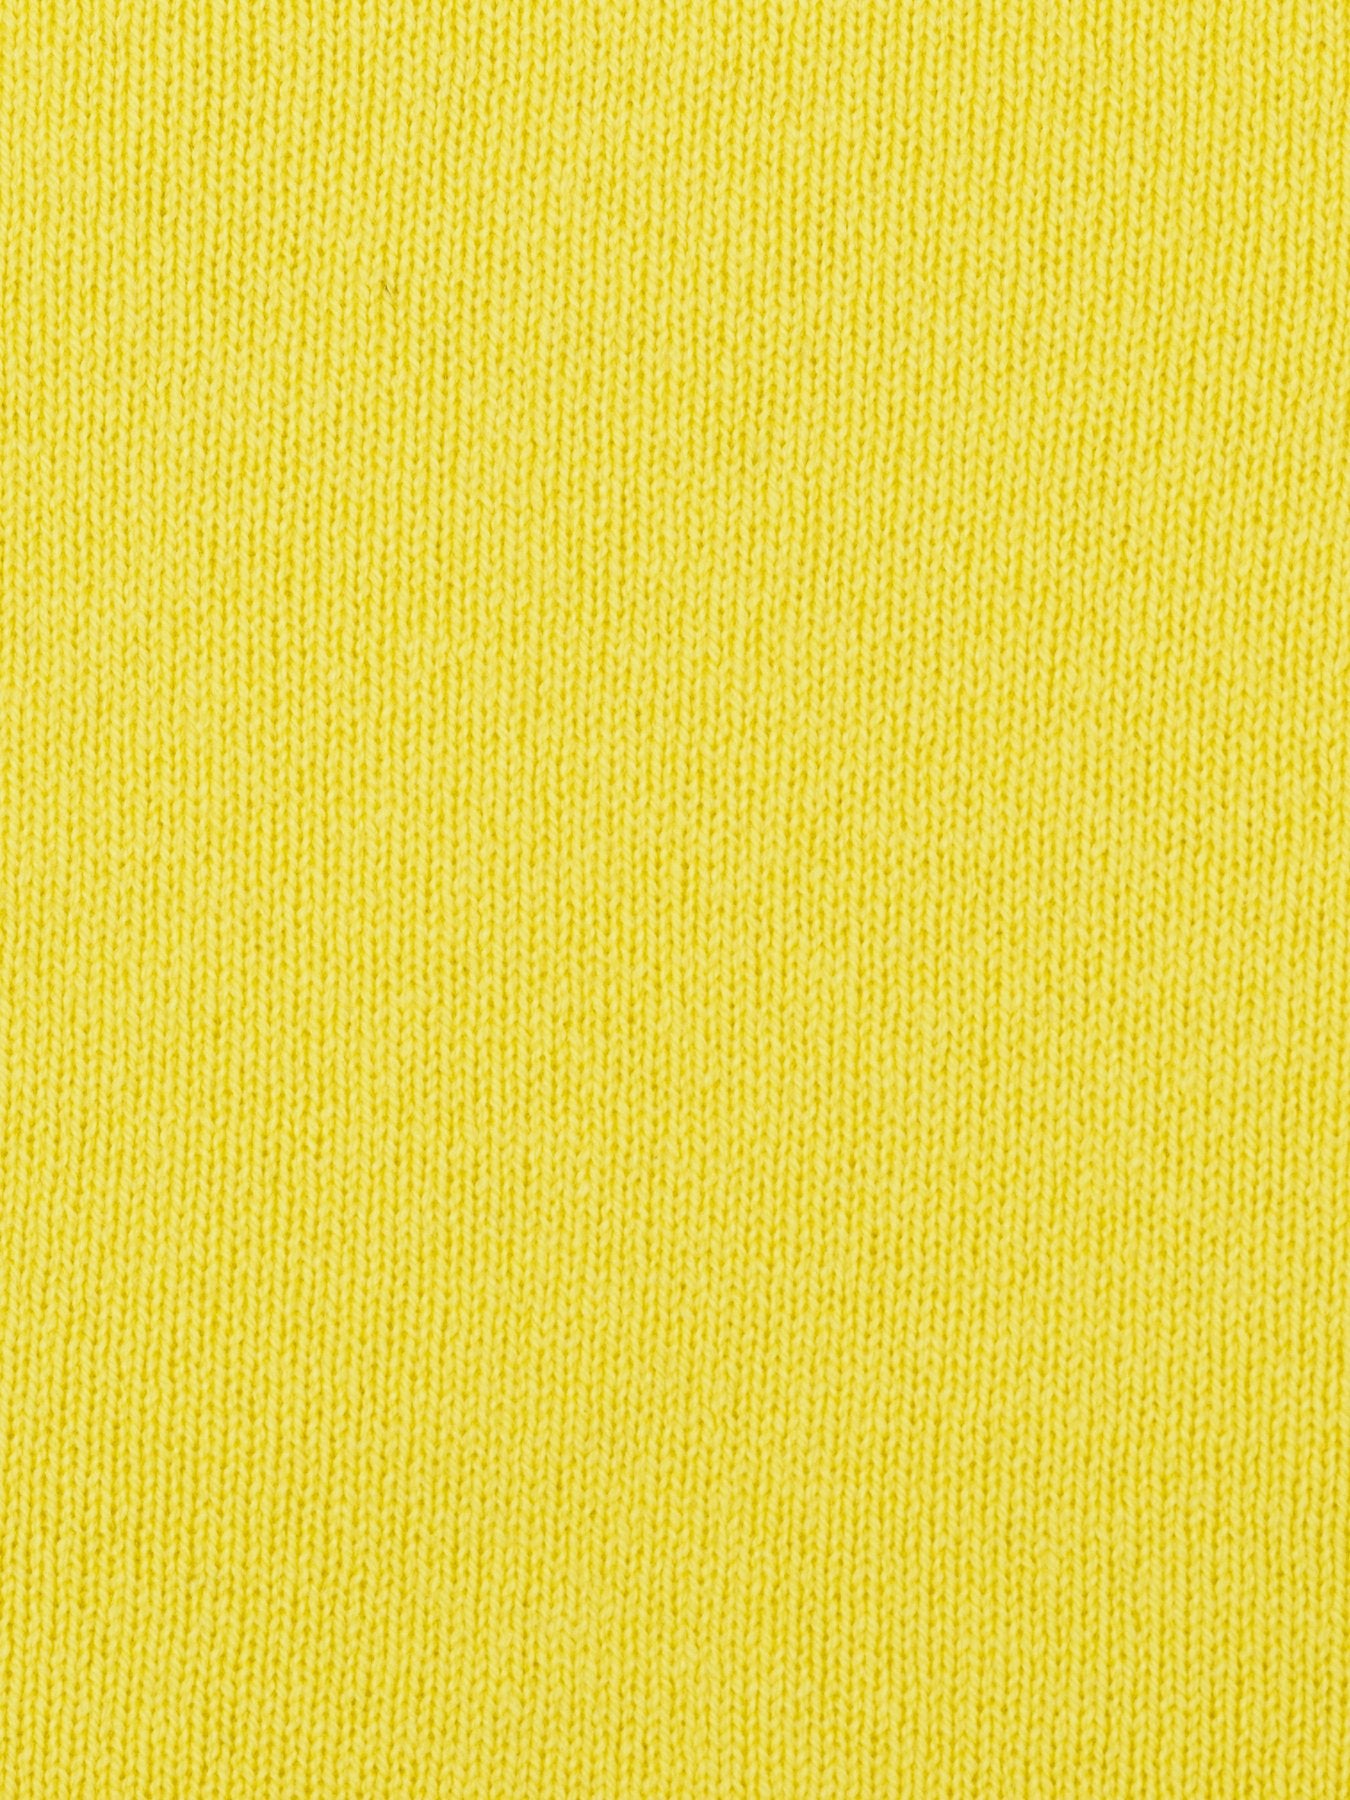 a swatch of plain single jersey knitting made from fine merino wool in a yellow colour